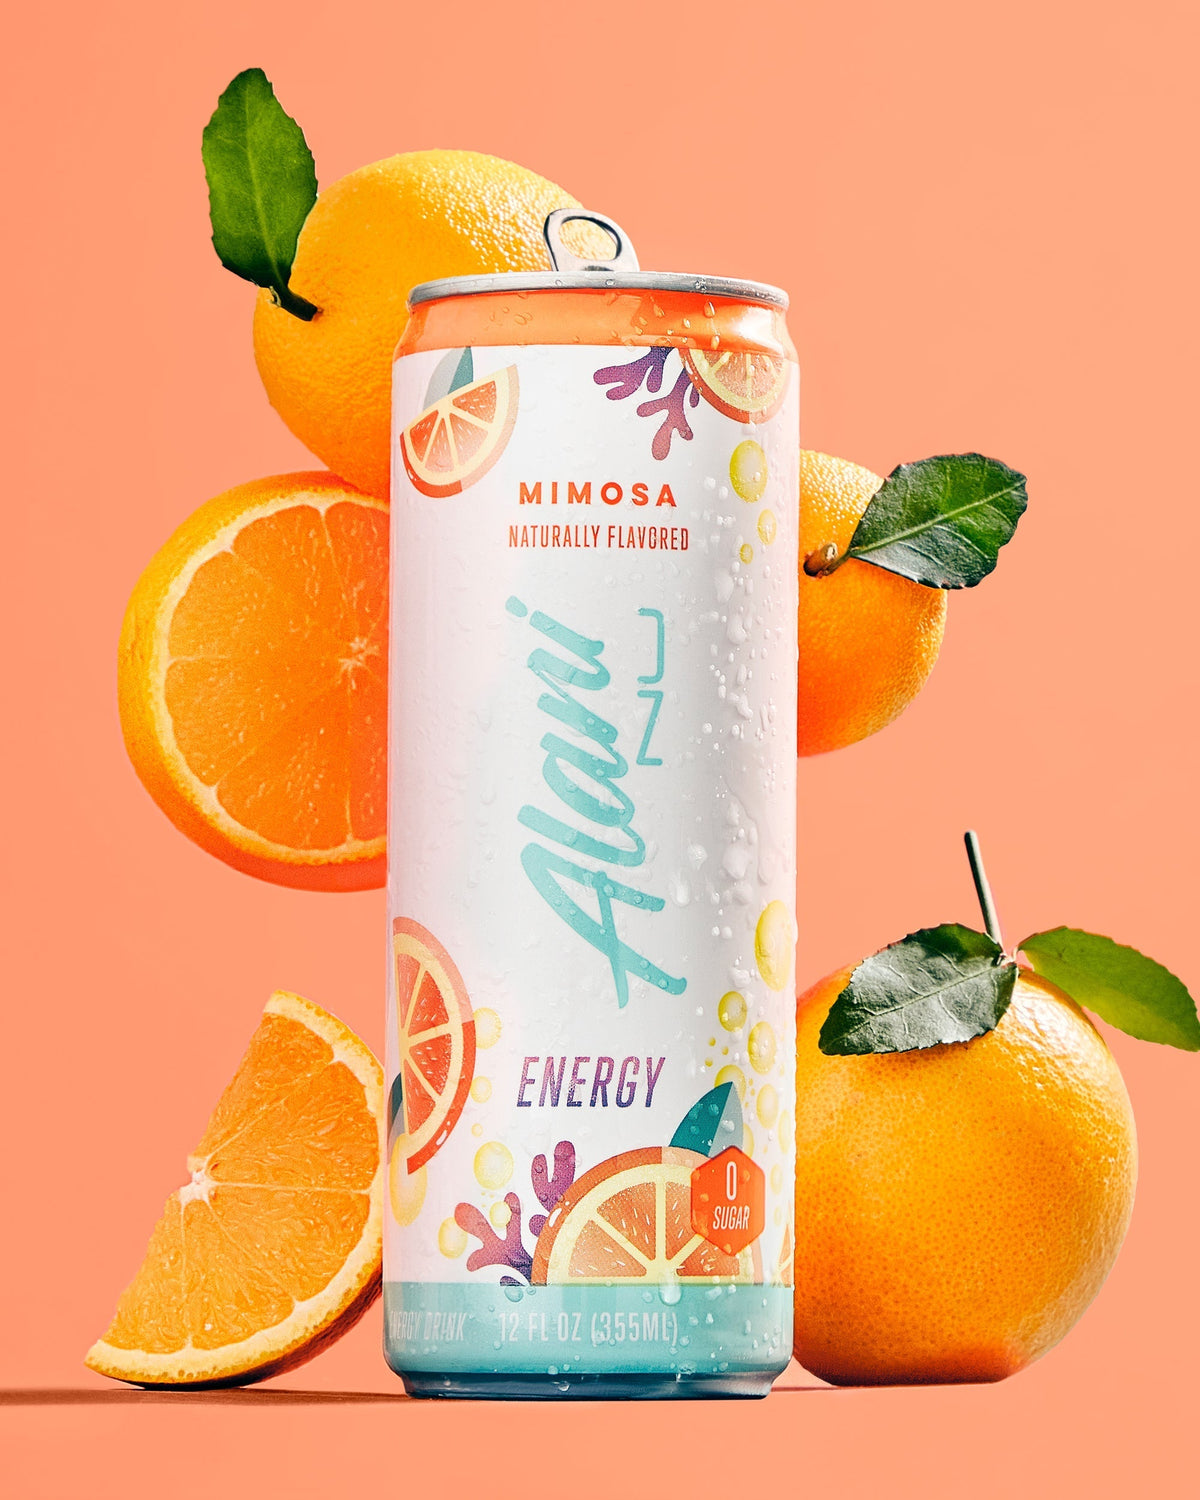 A Energy Drink in Mimosa flavor surrounded by oranges.